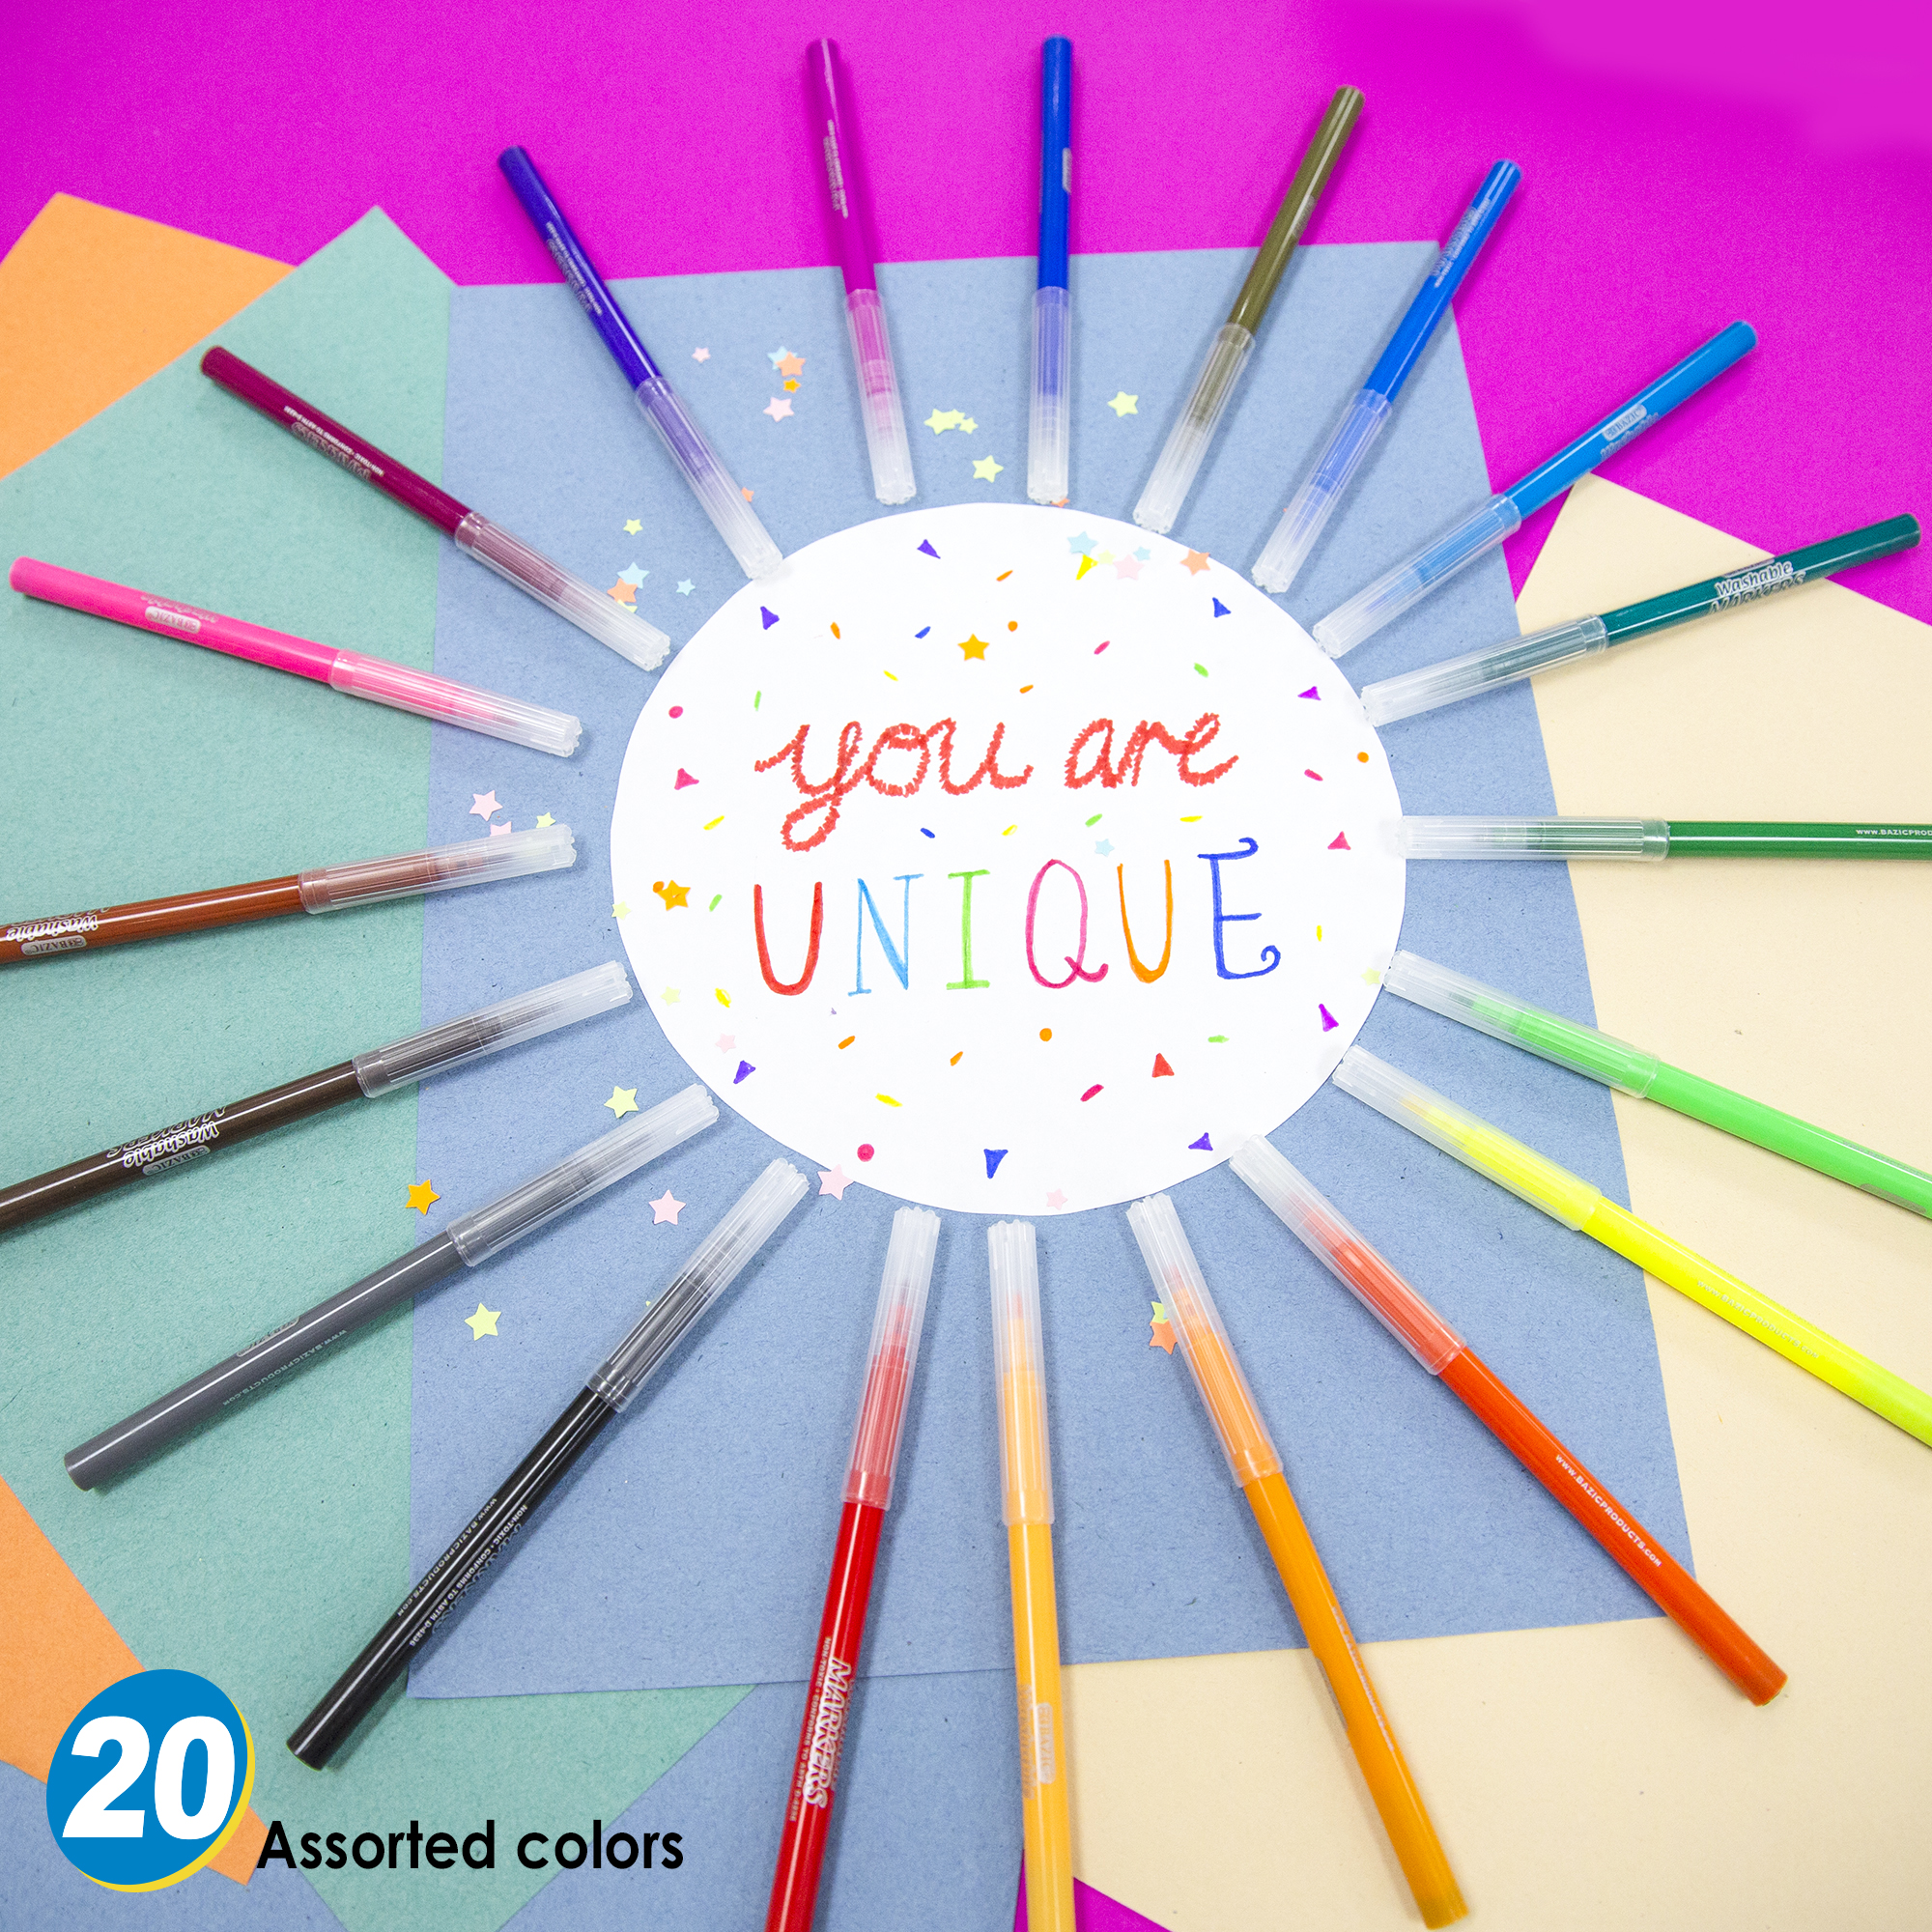 Color with me and learn about markers! Free Image Provided! – The